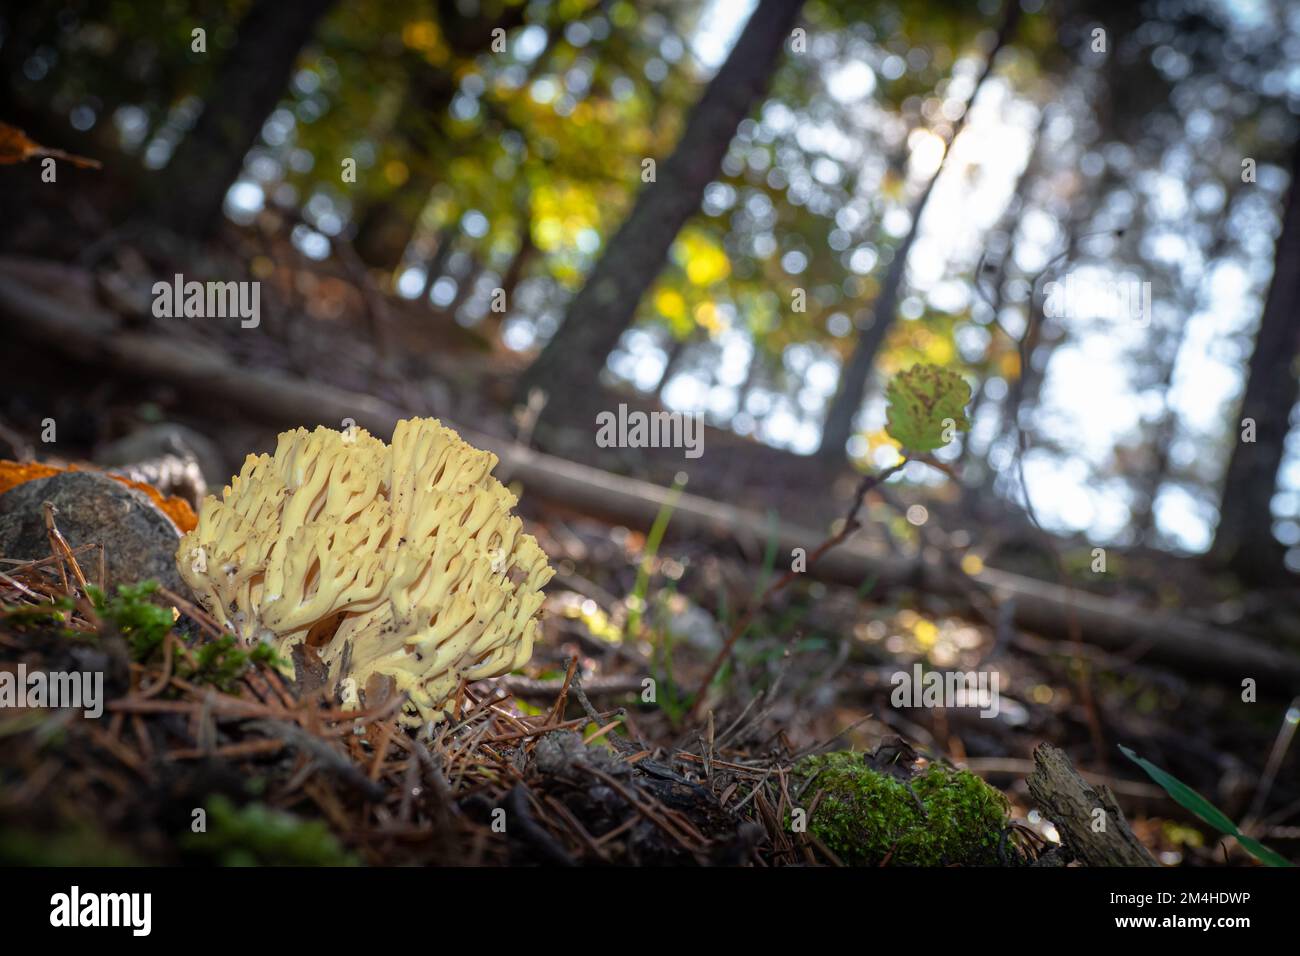 Beautiful colorful coral mushroom growing wild in the forest Stock Photo